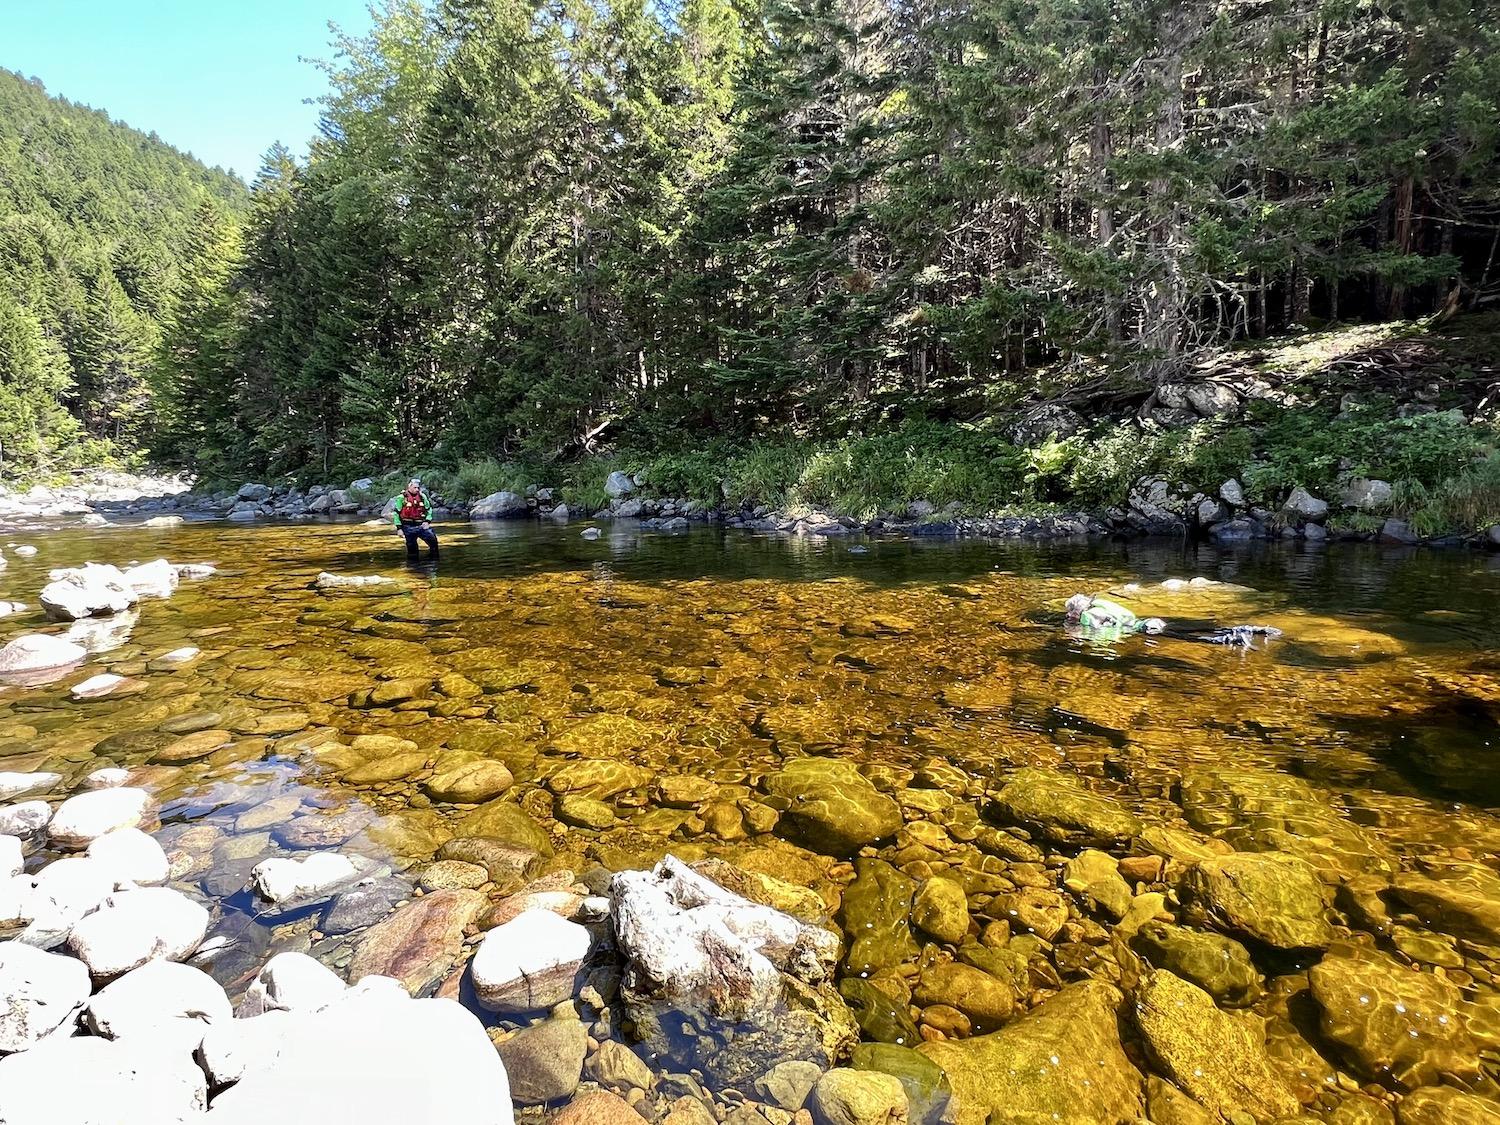 Parks Canada's John Robinson watches as writer Jennifer Bain snorkels in the Upper Salmon River in Fundy National Park looking for Atlantic salmon.